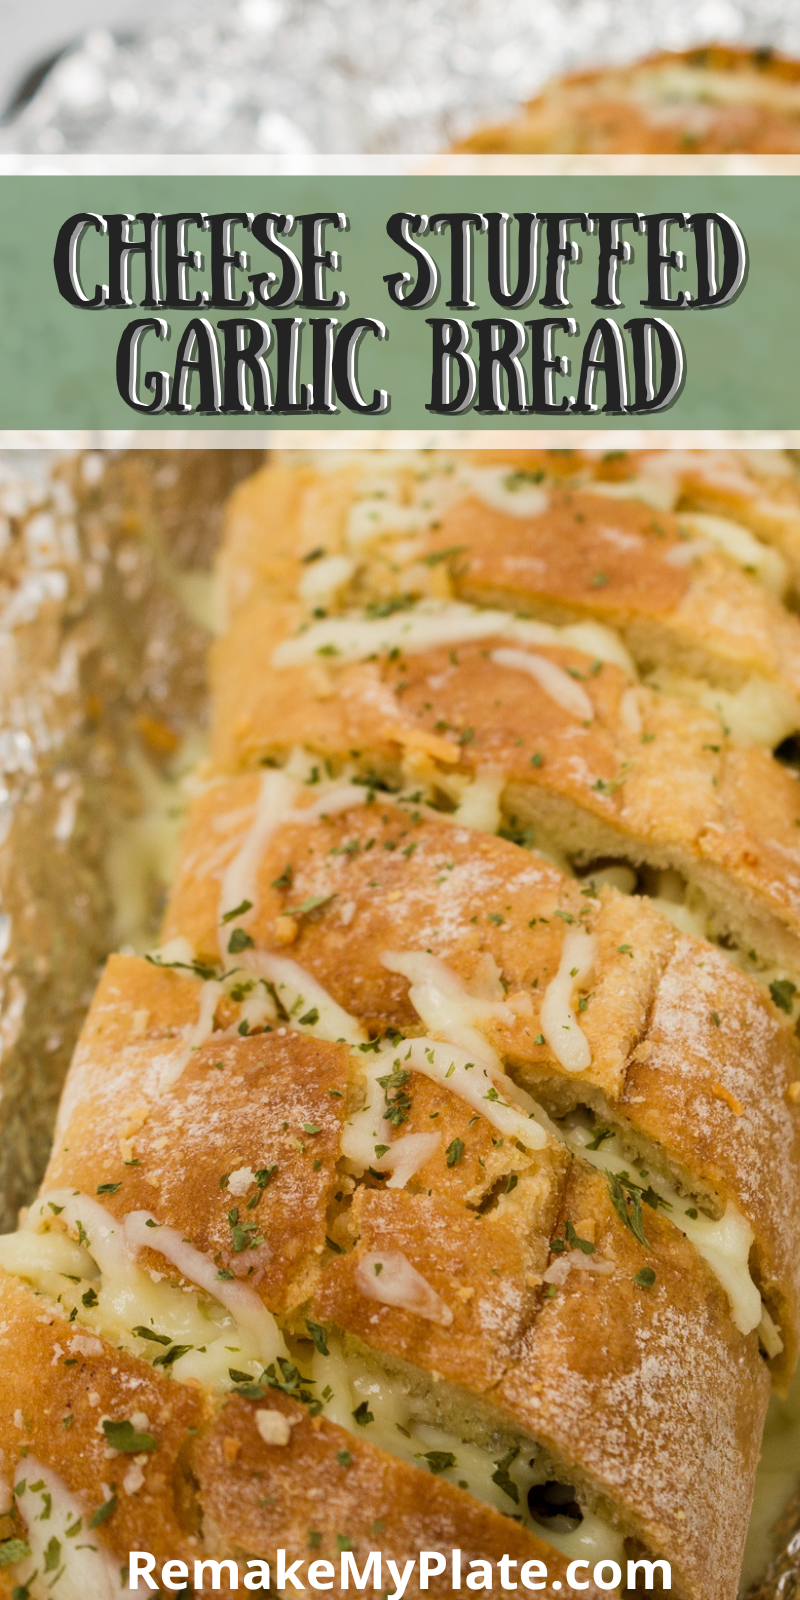 Looking for an easy to make side dish? Spread a delicious homemade garlic butter on this cheese stuffed Garlic Bread Baguette and toast it until it's golden brown. It's a family favorite and one that everyone goes back to for seconds. #cheesebread #garlicbread #easyrecipes